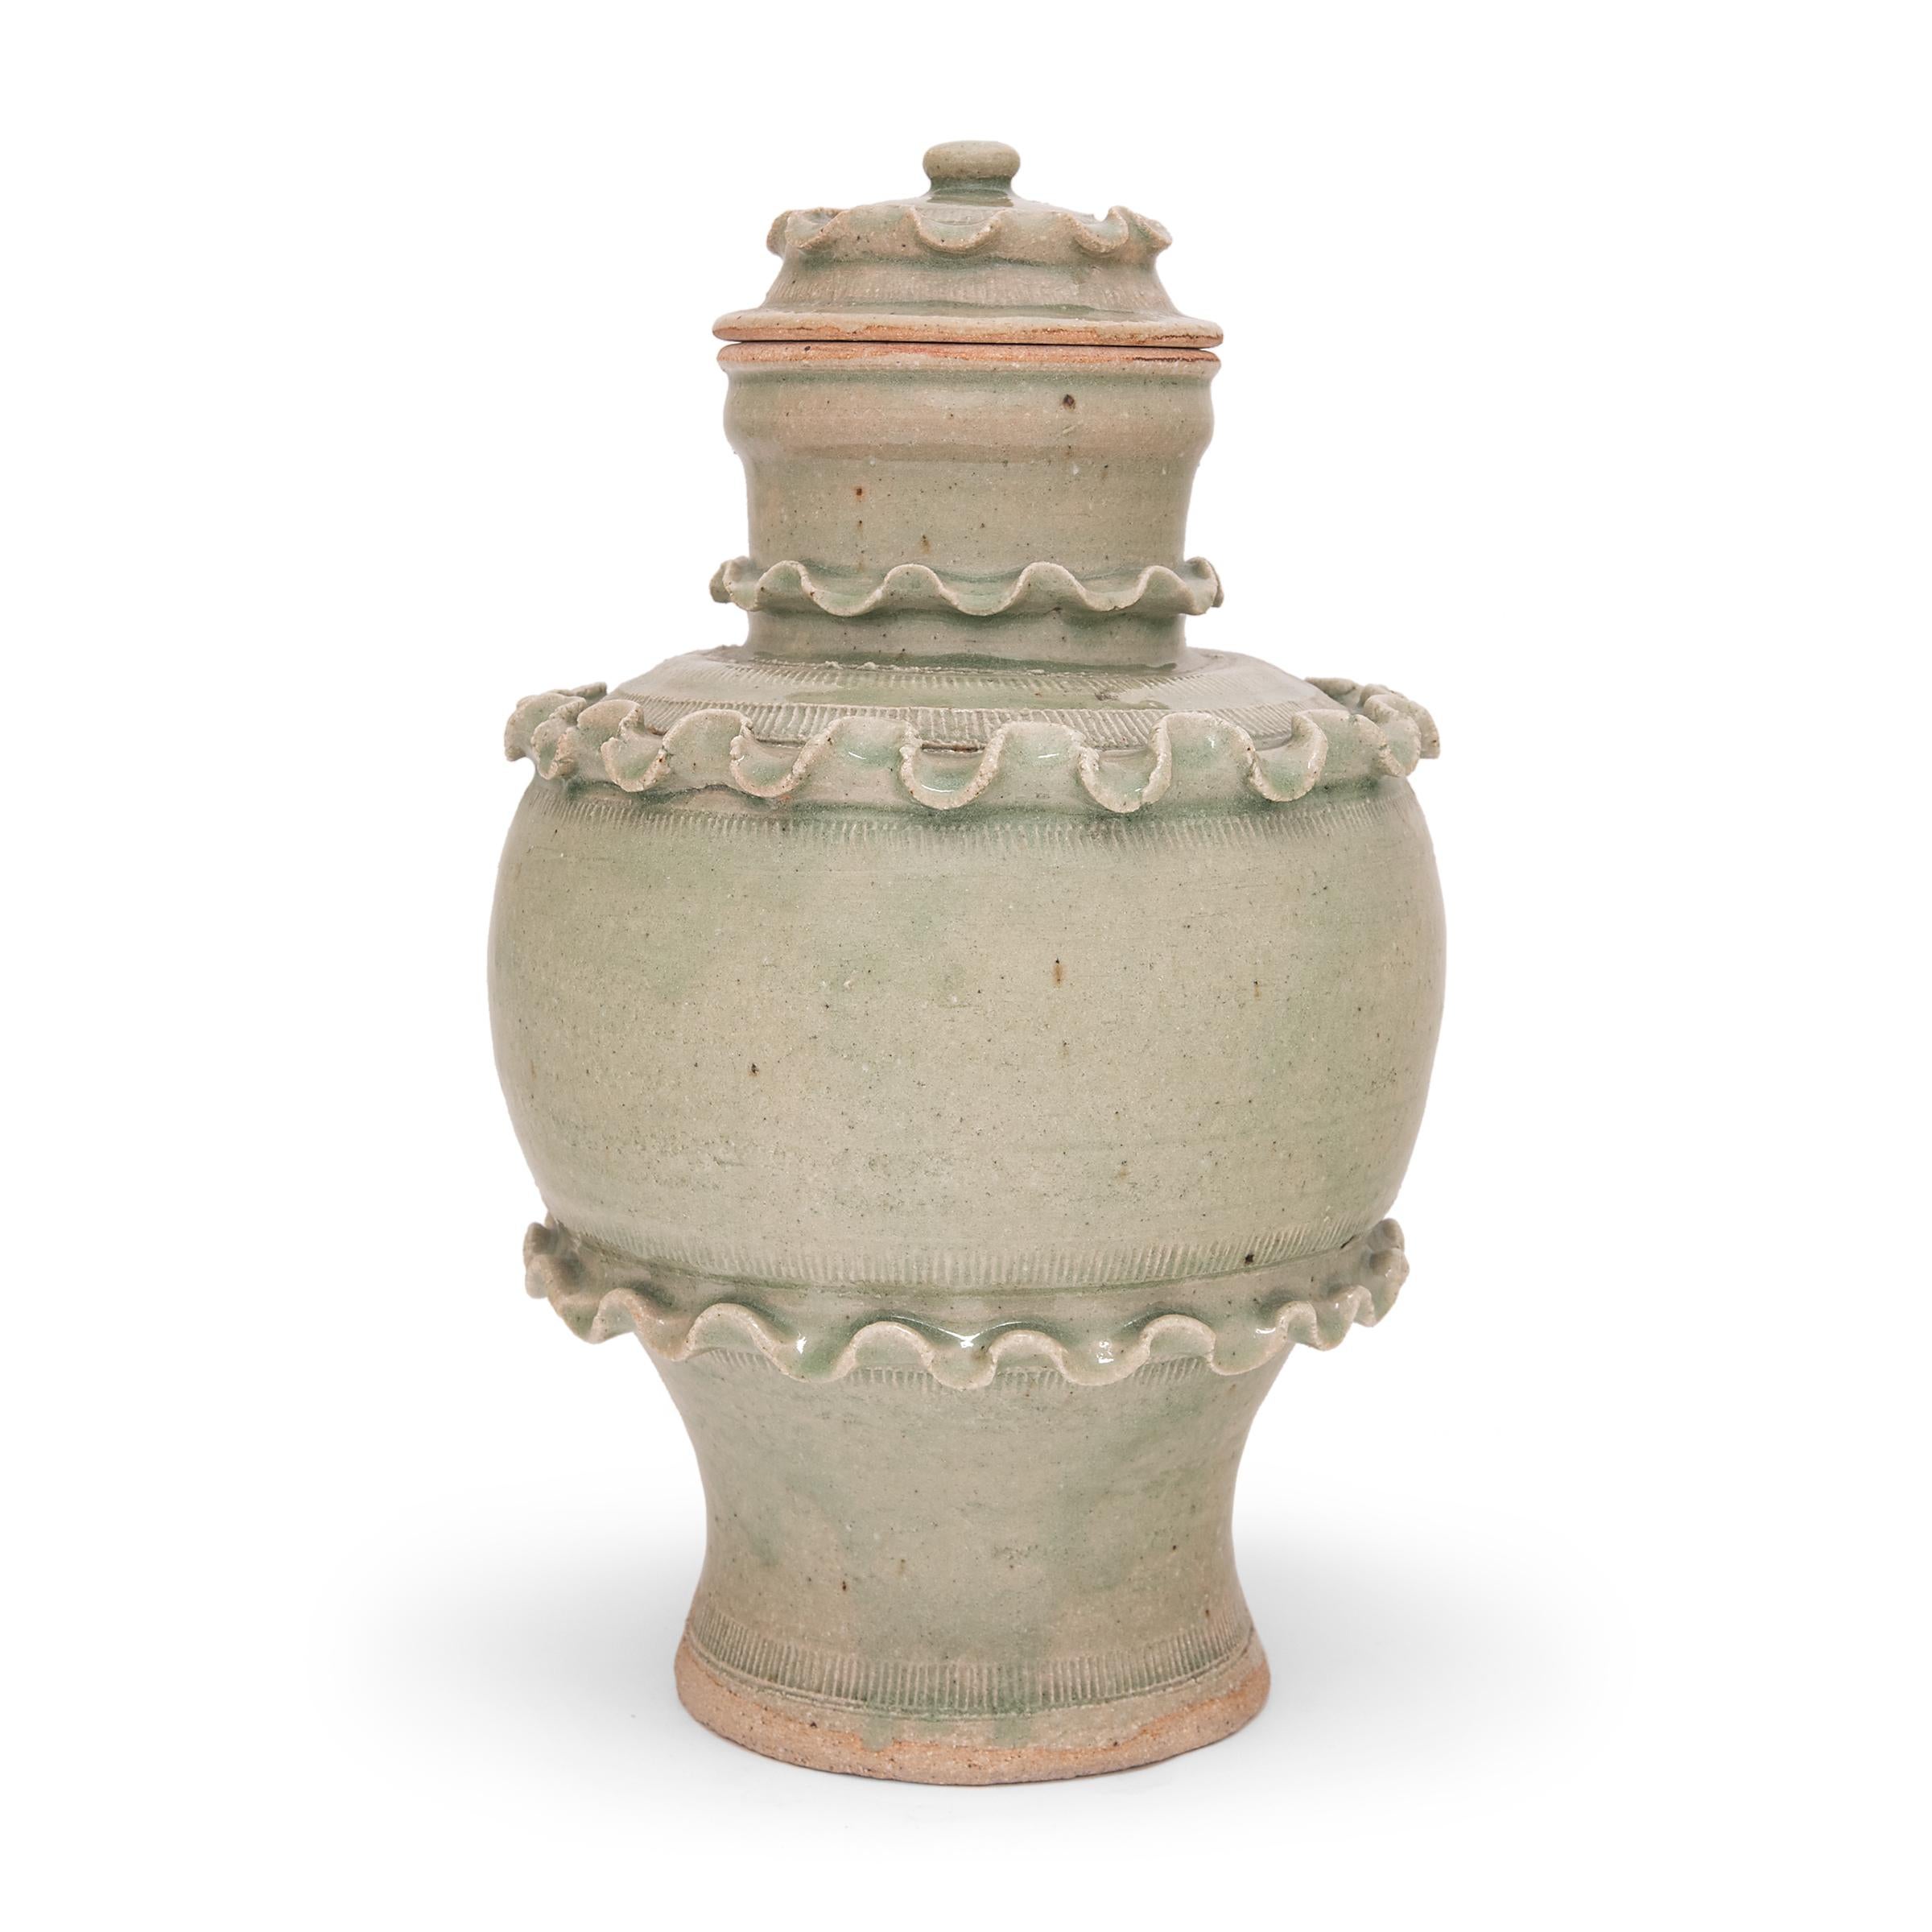 This green glazed jar is designed in the style of ancient Chinese ceremonial vessels found in temples or tombs. Often elaborately decorated with miniature figures and relief patterns, such vessels were used for storing food offerings to the gods or